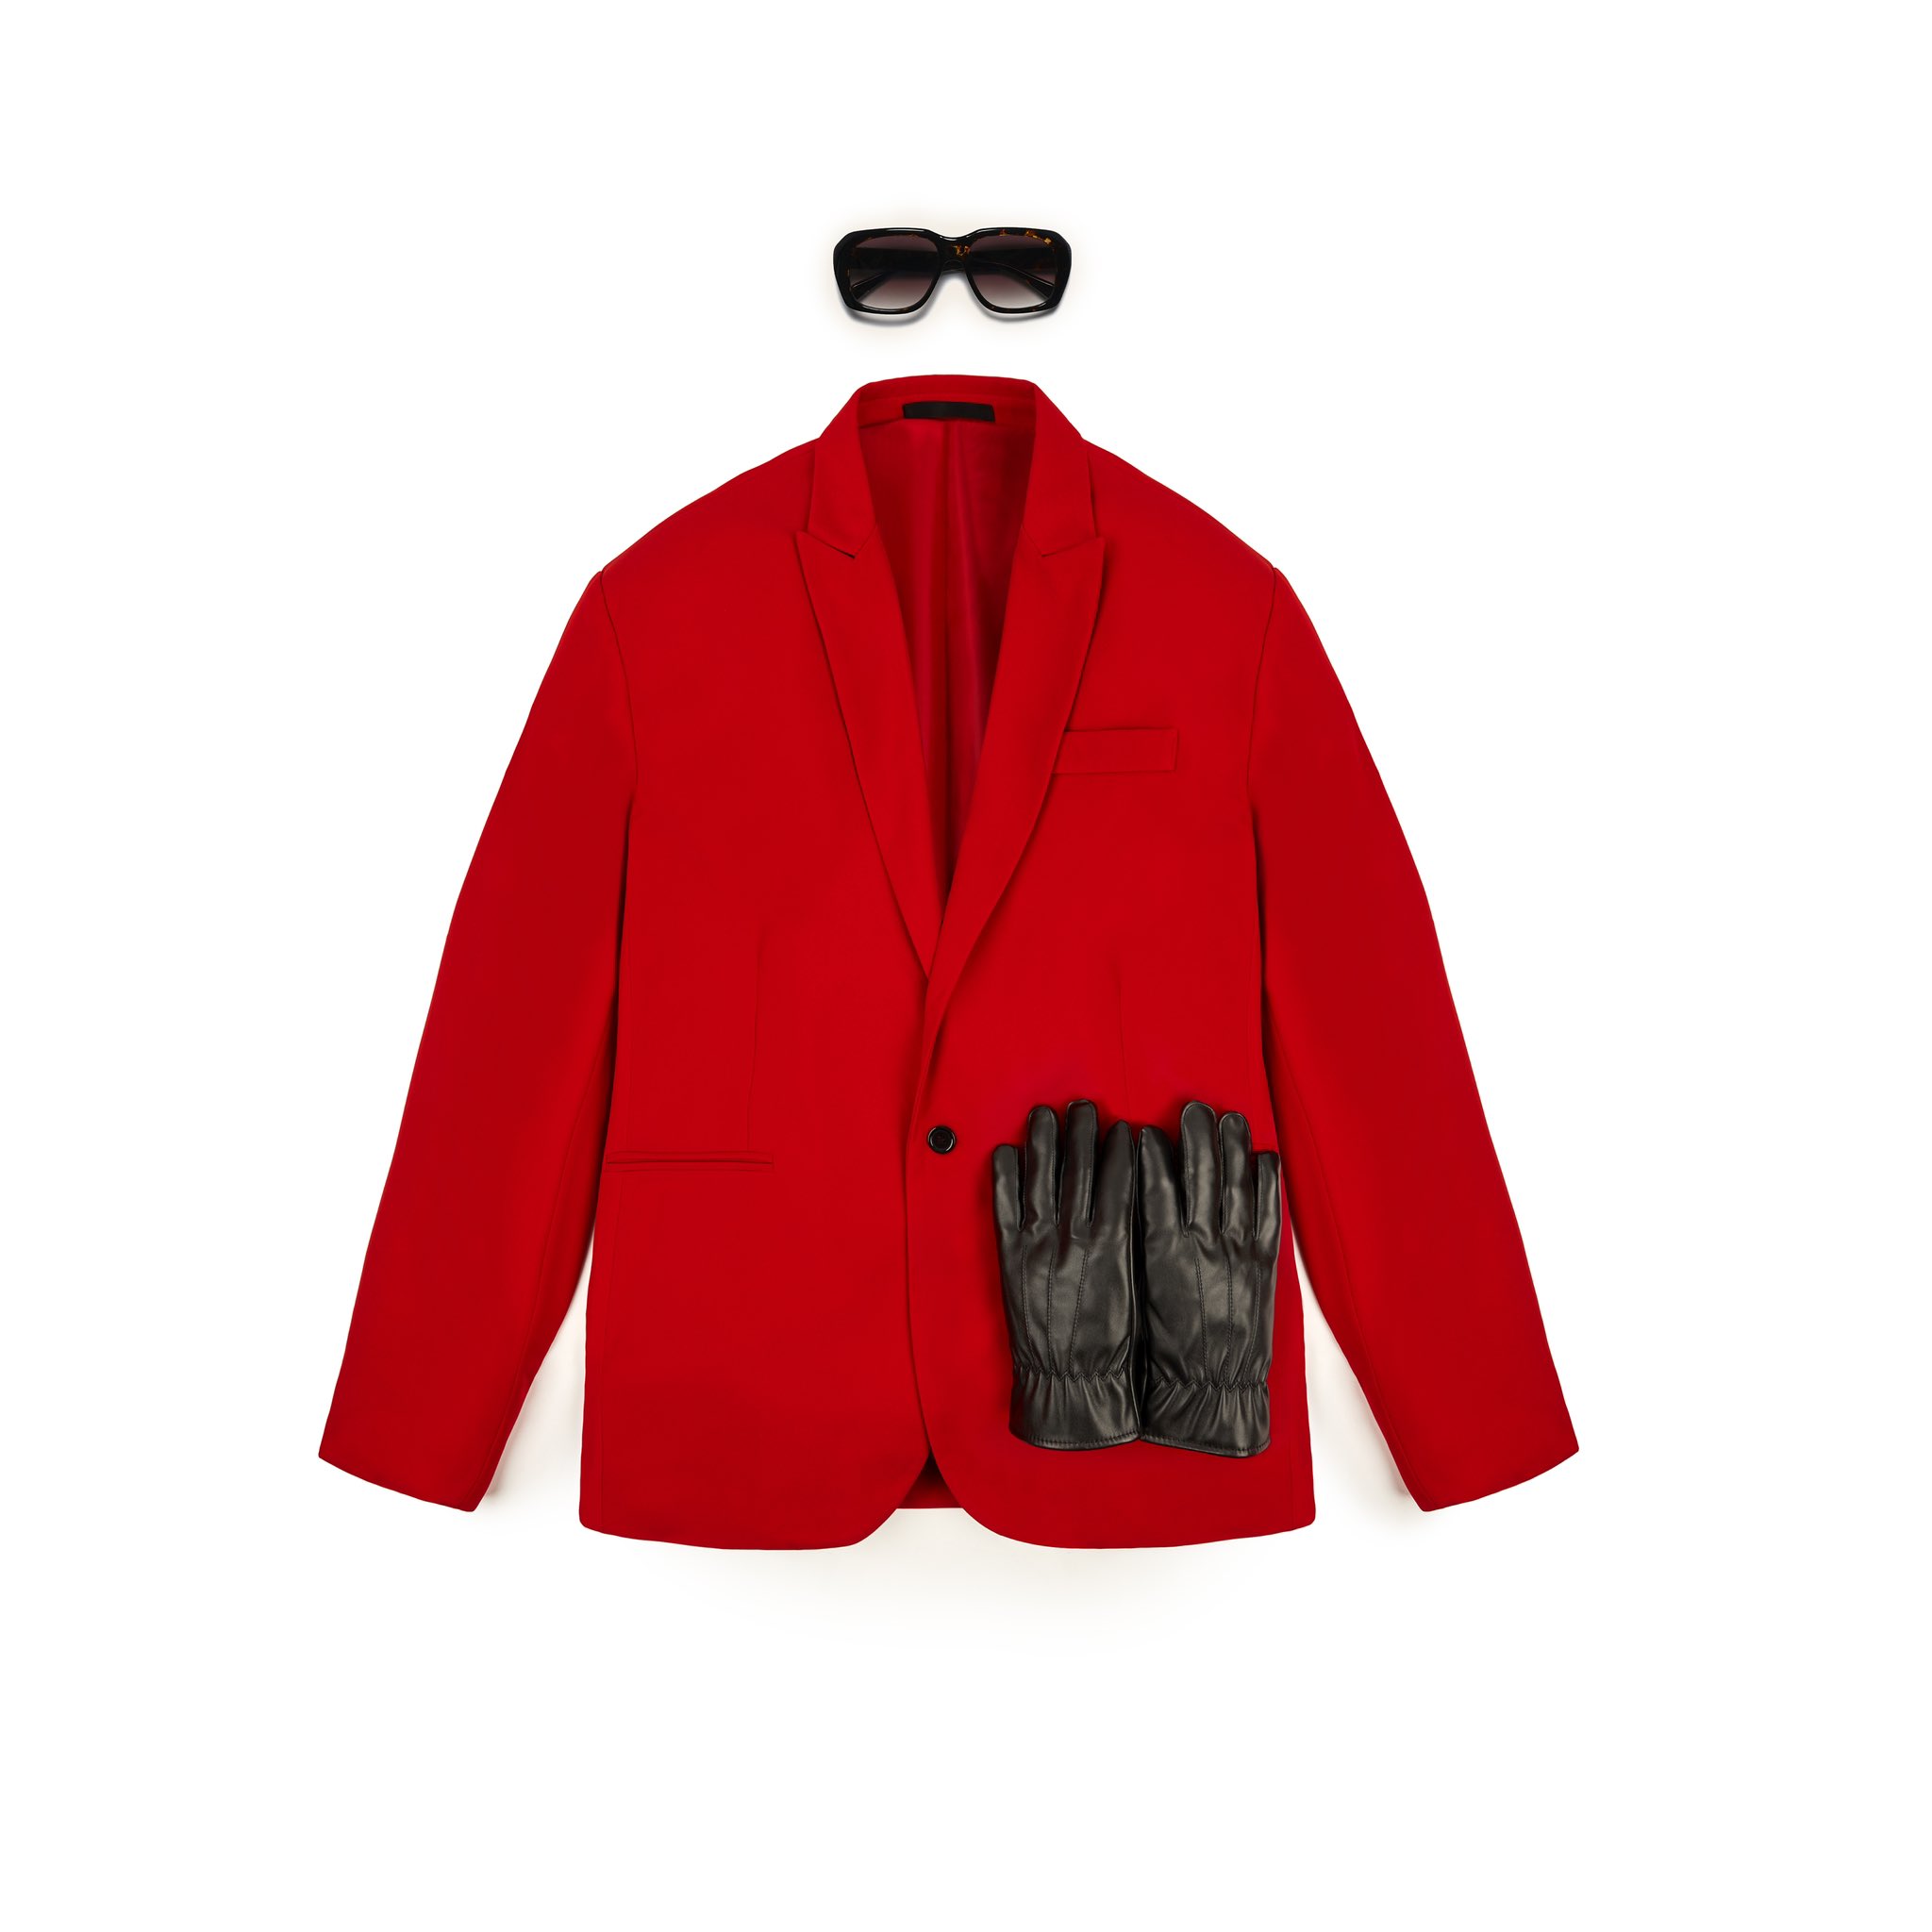 The Weeknd Red Blazer Coat  Buy Now The Weeknd Red Suit